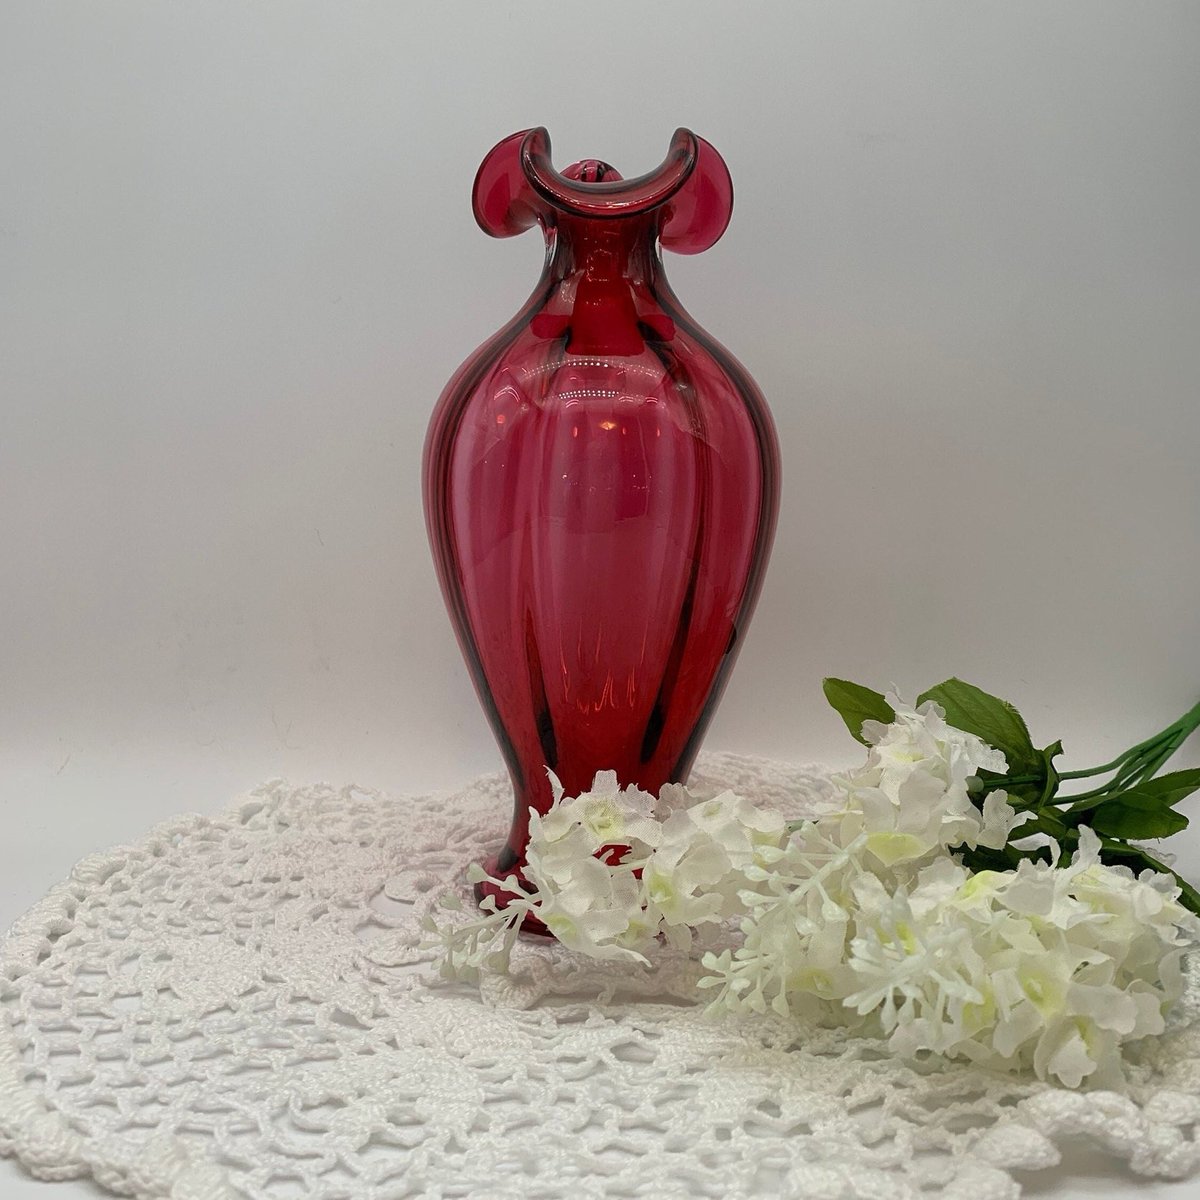 Excited to share this item from my #etsy shop: Vintage Hand Blown Cranberry Vase,  Art Glass Ruby Color Crimped Glass Bud Vase,  Reverse Melon Shabby Cottage  #reversemelonvase #cranberryglassvase #cranberryvase #ruffleglassvase #artglassvase #vintagevase etsy.me/3zTwQdk